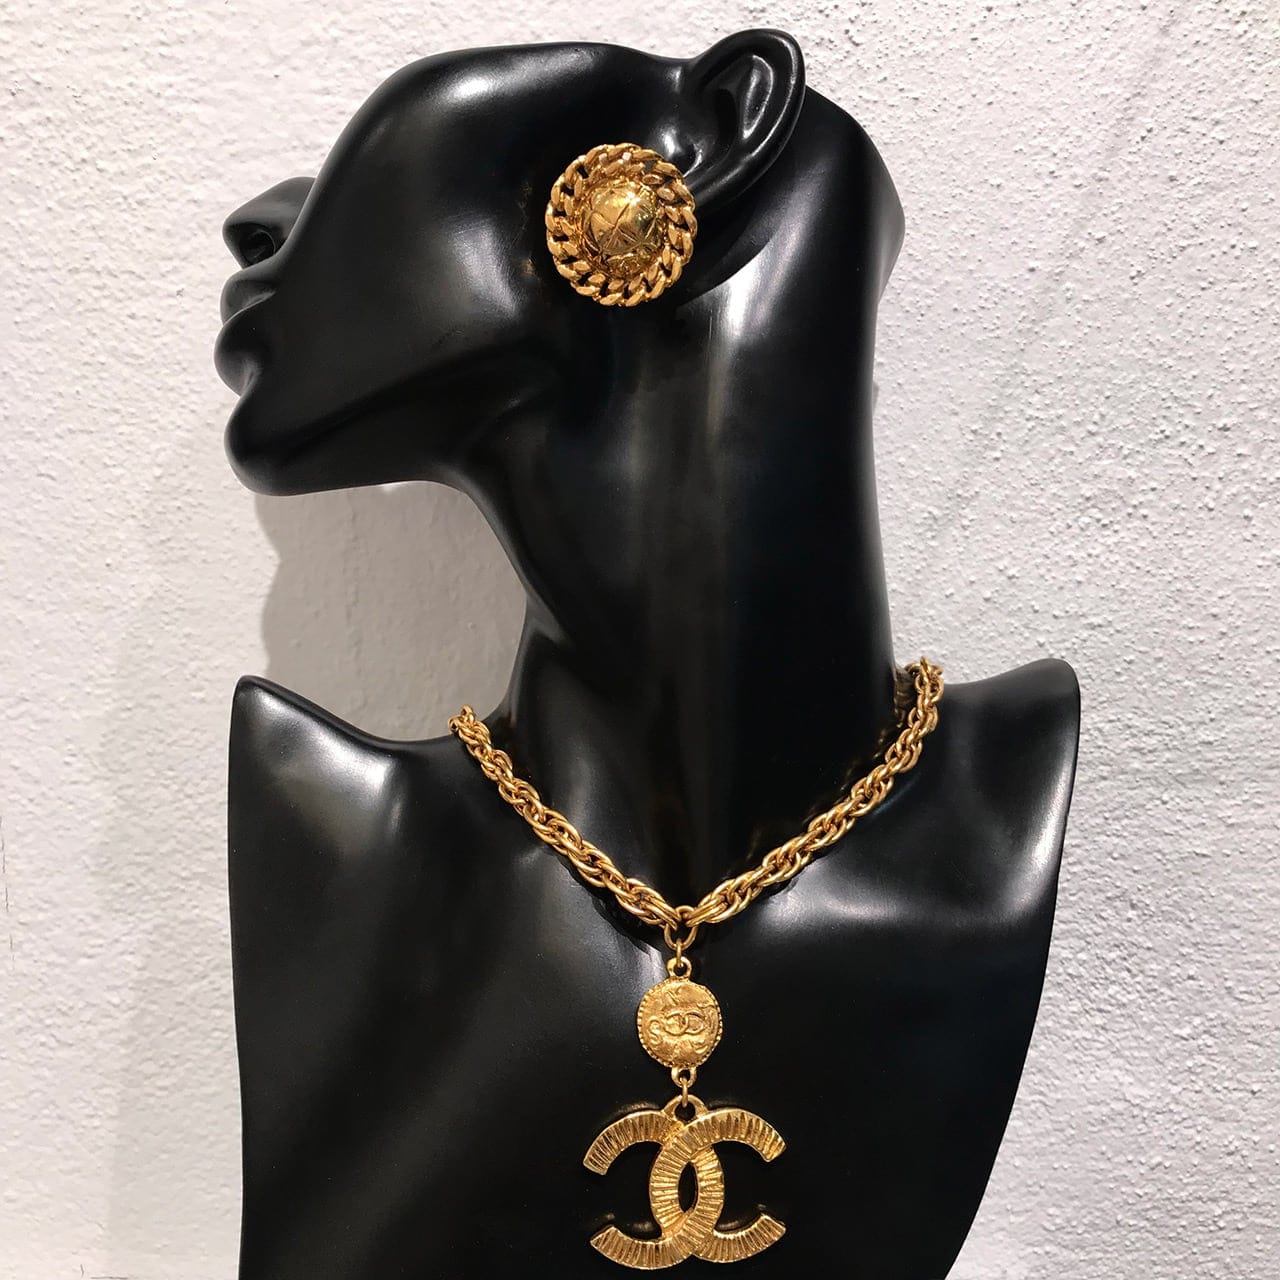 NEW Vintage Chanel Jewelry 💎 - Madison Avenue Couture